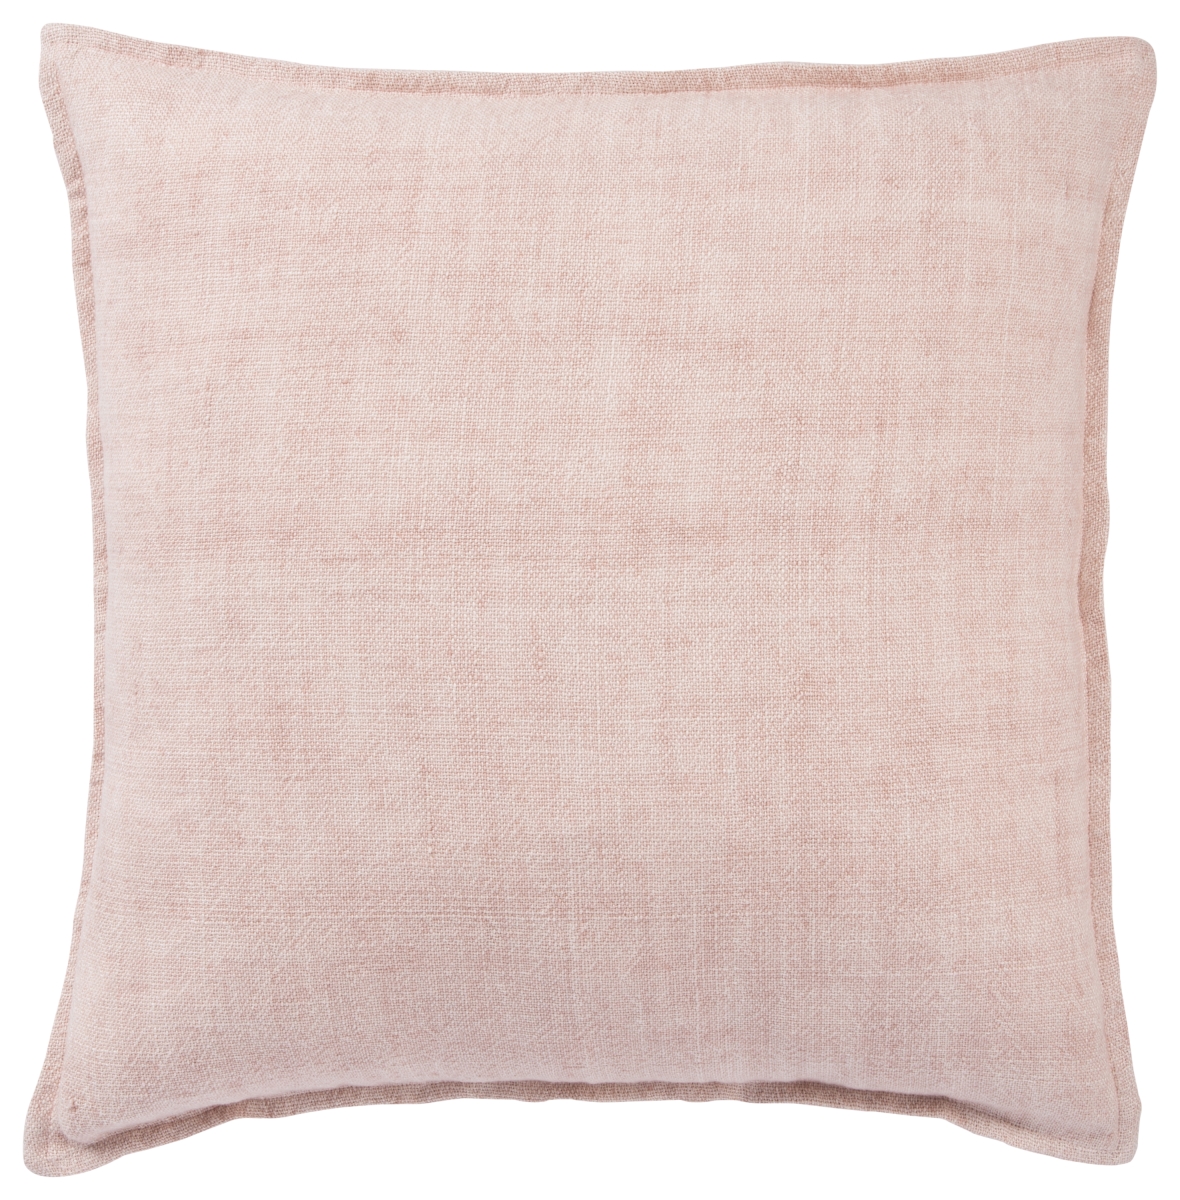 Plw103281 22 X 22 In. Burbank Blanche Solid Light Pink Down Throw Pillow